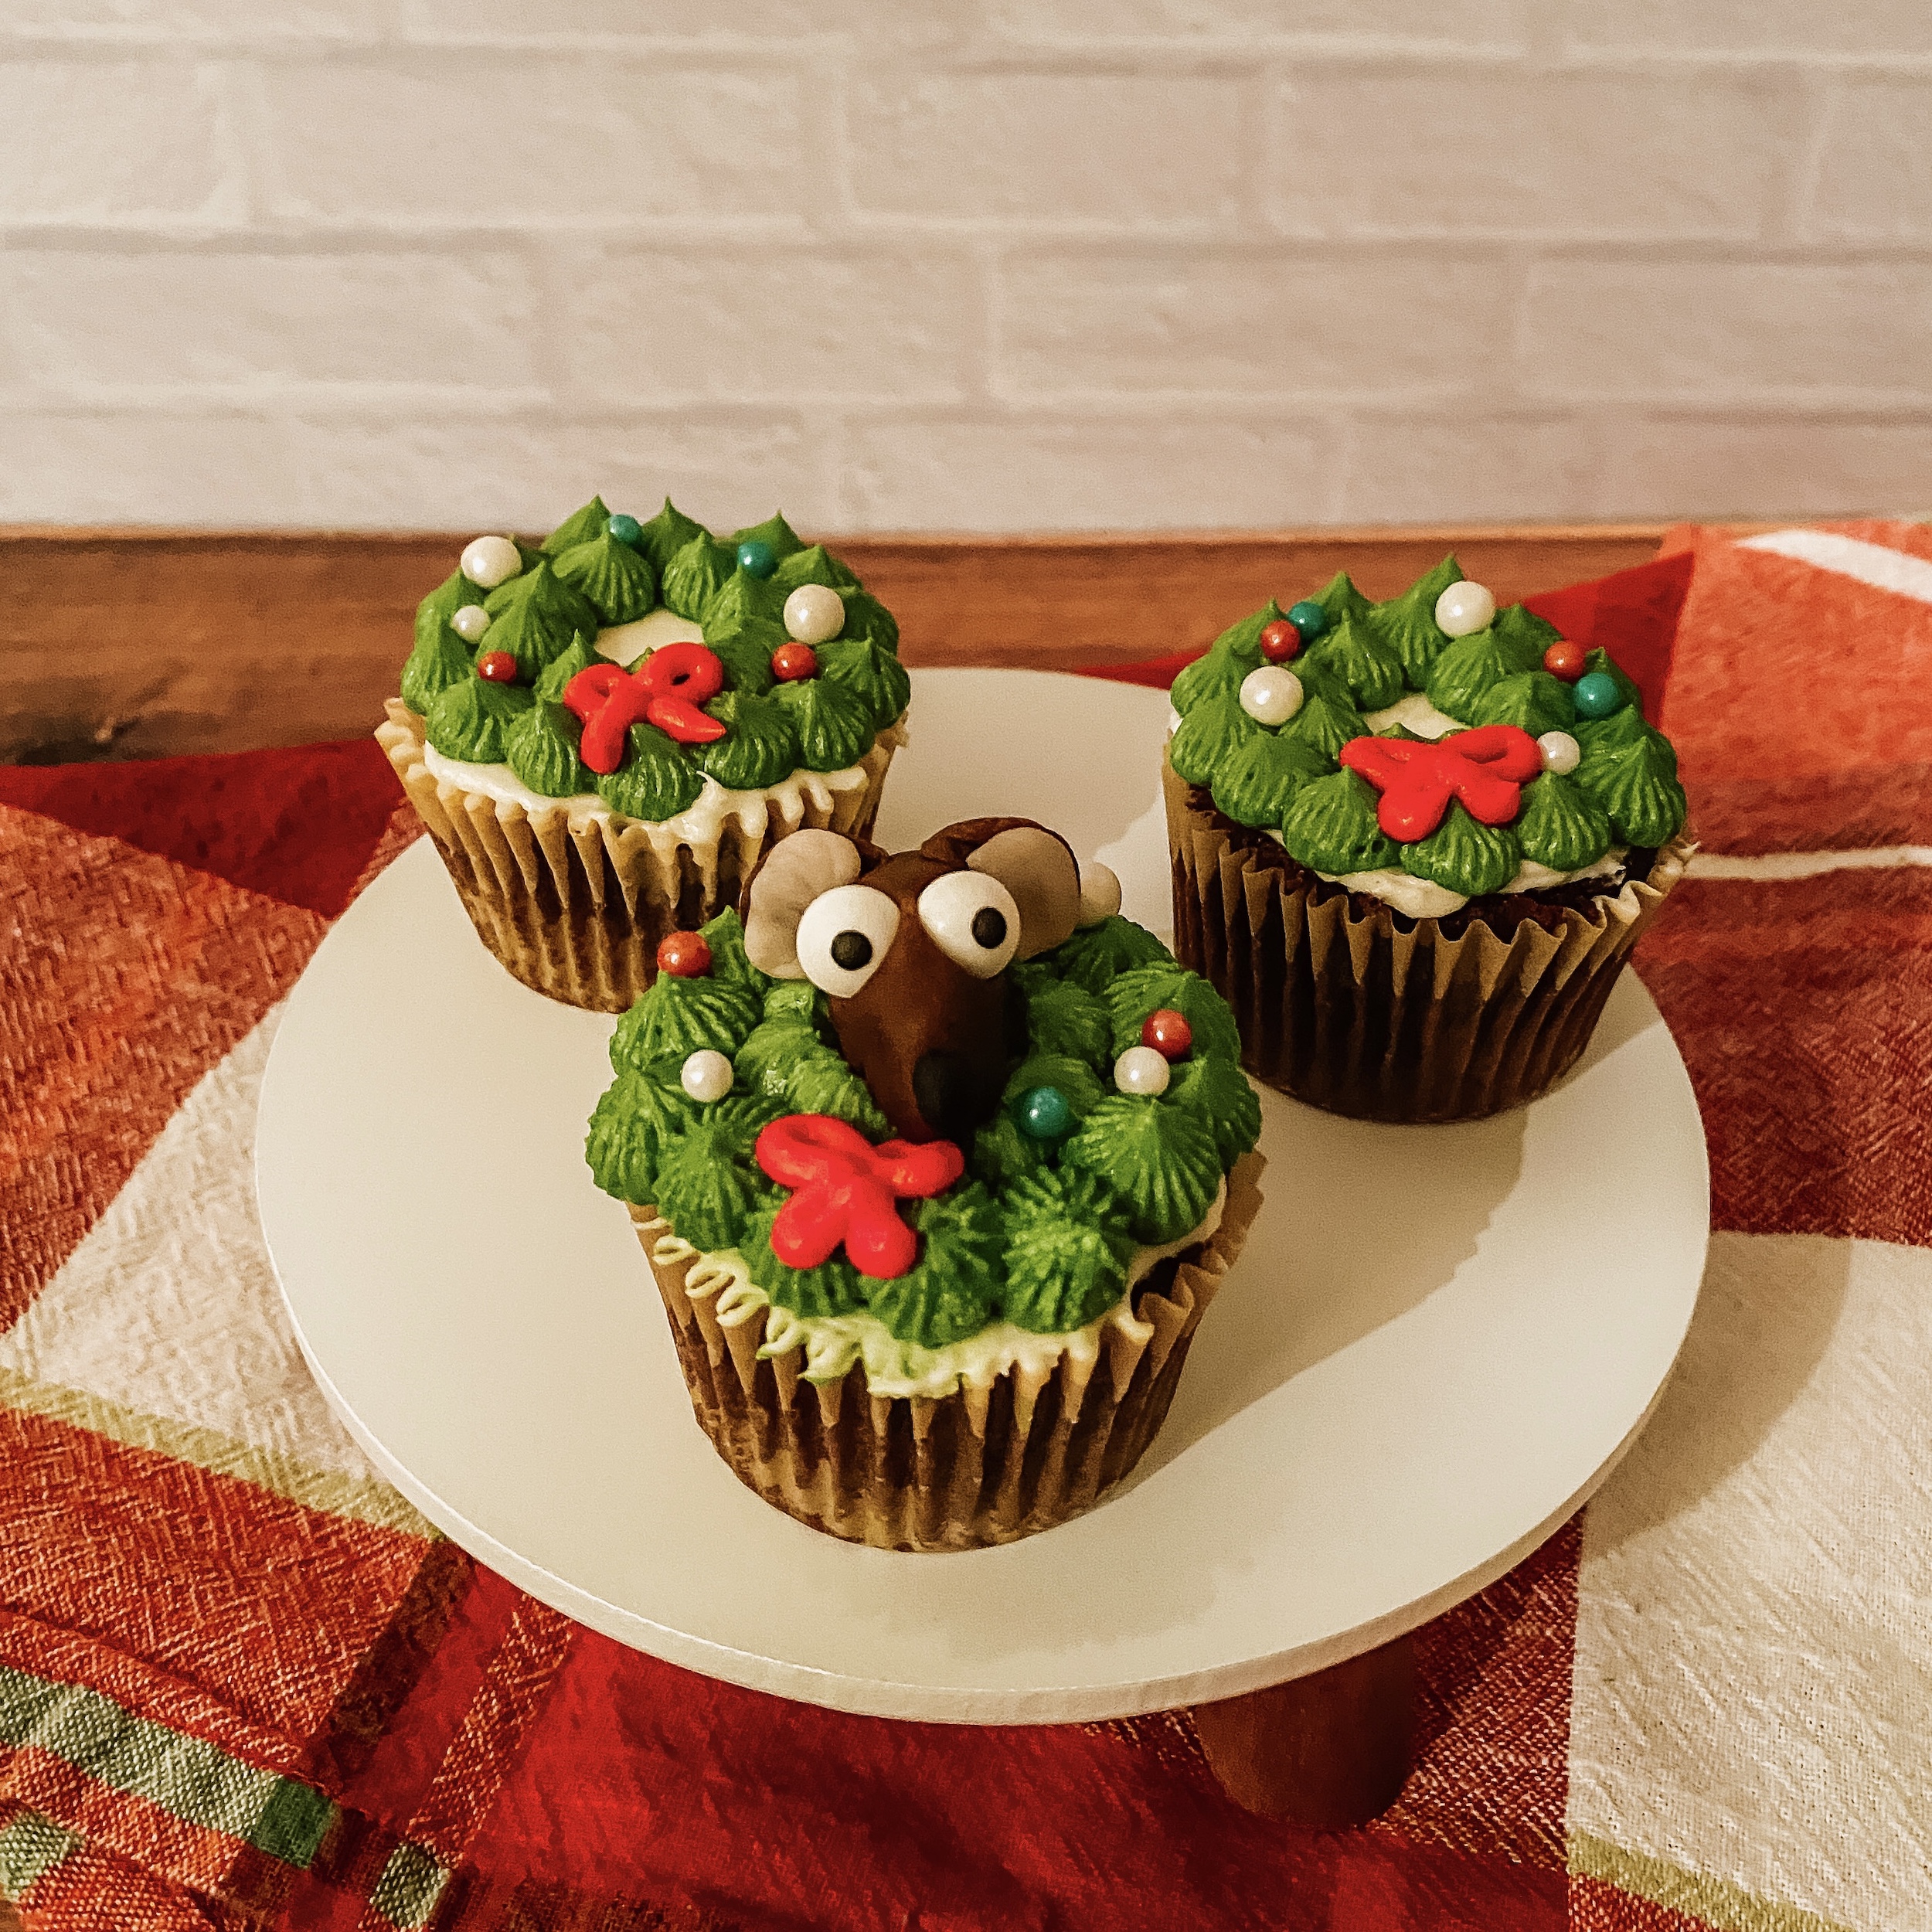 Rizzo's "Here for the Food" Cupcakes (chocolate spice cupcakes with a buttercream christmas wreath and a fondant Rizzo head) on a plate with a red and green plaid napkin beneath it.